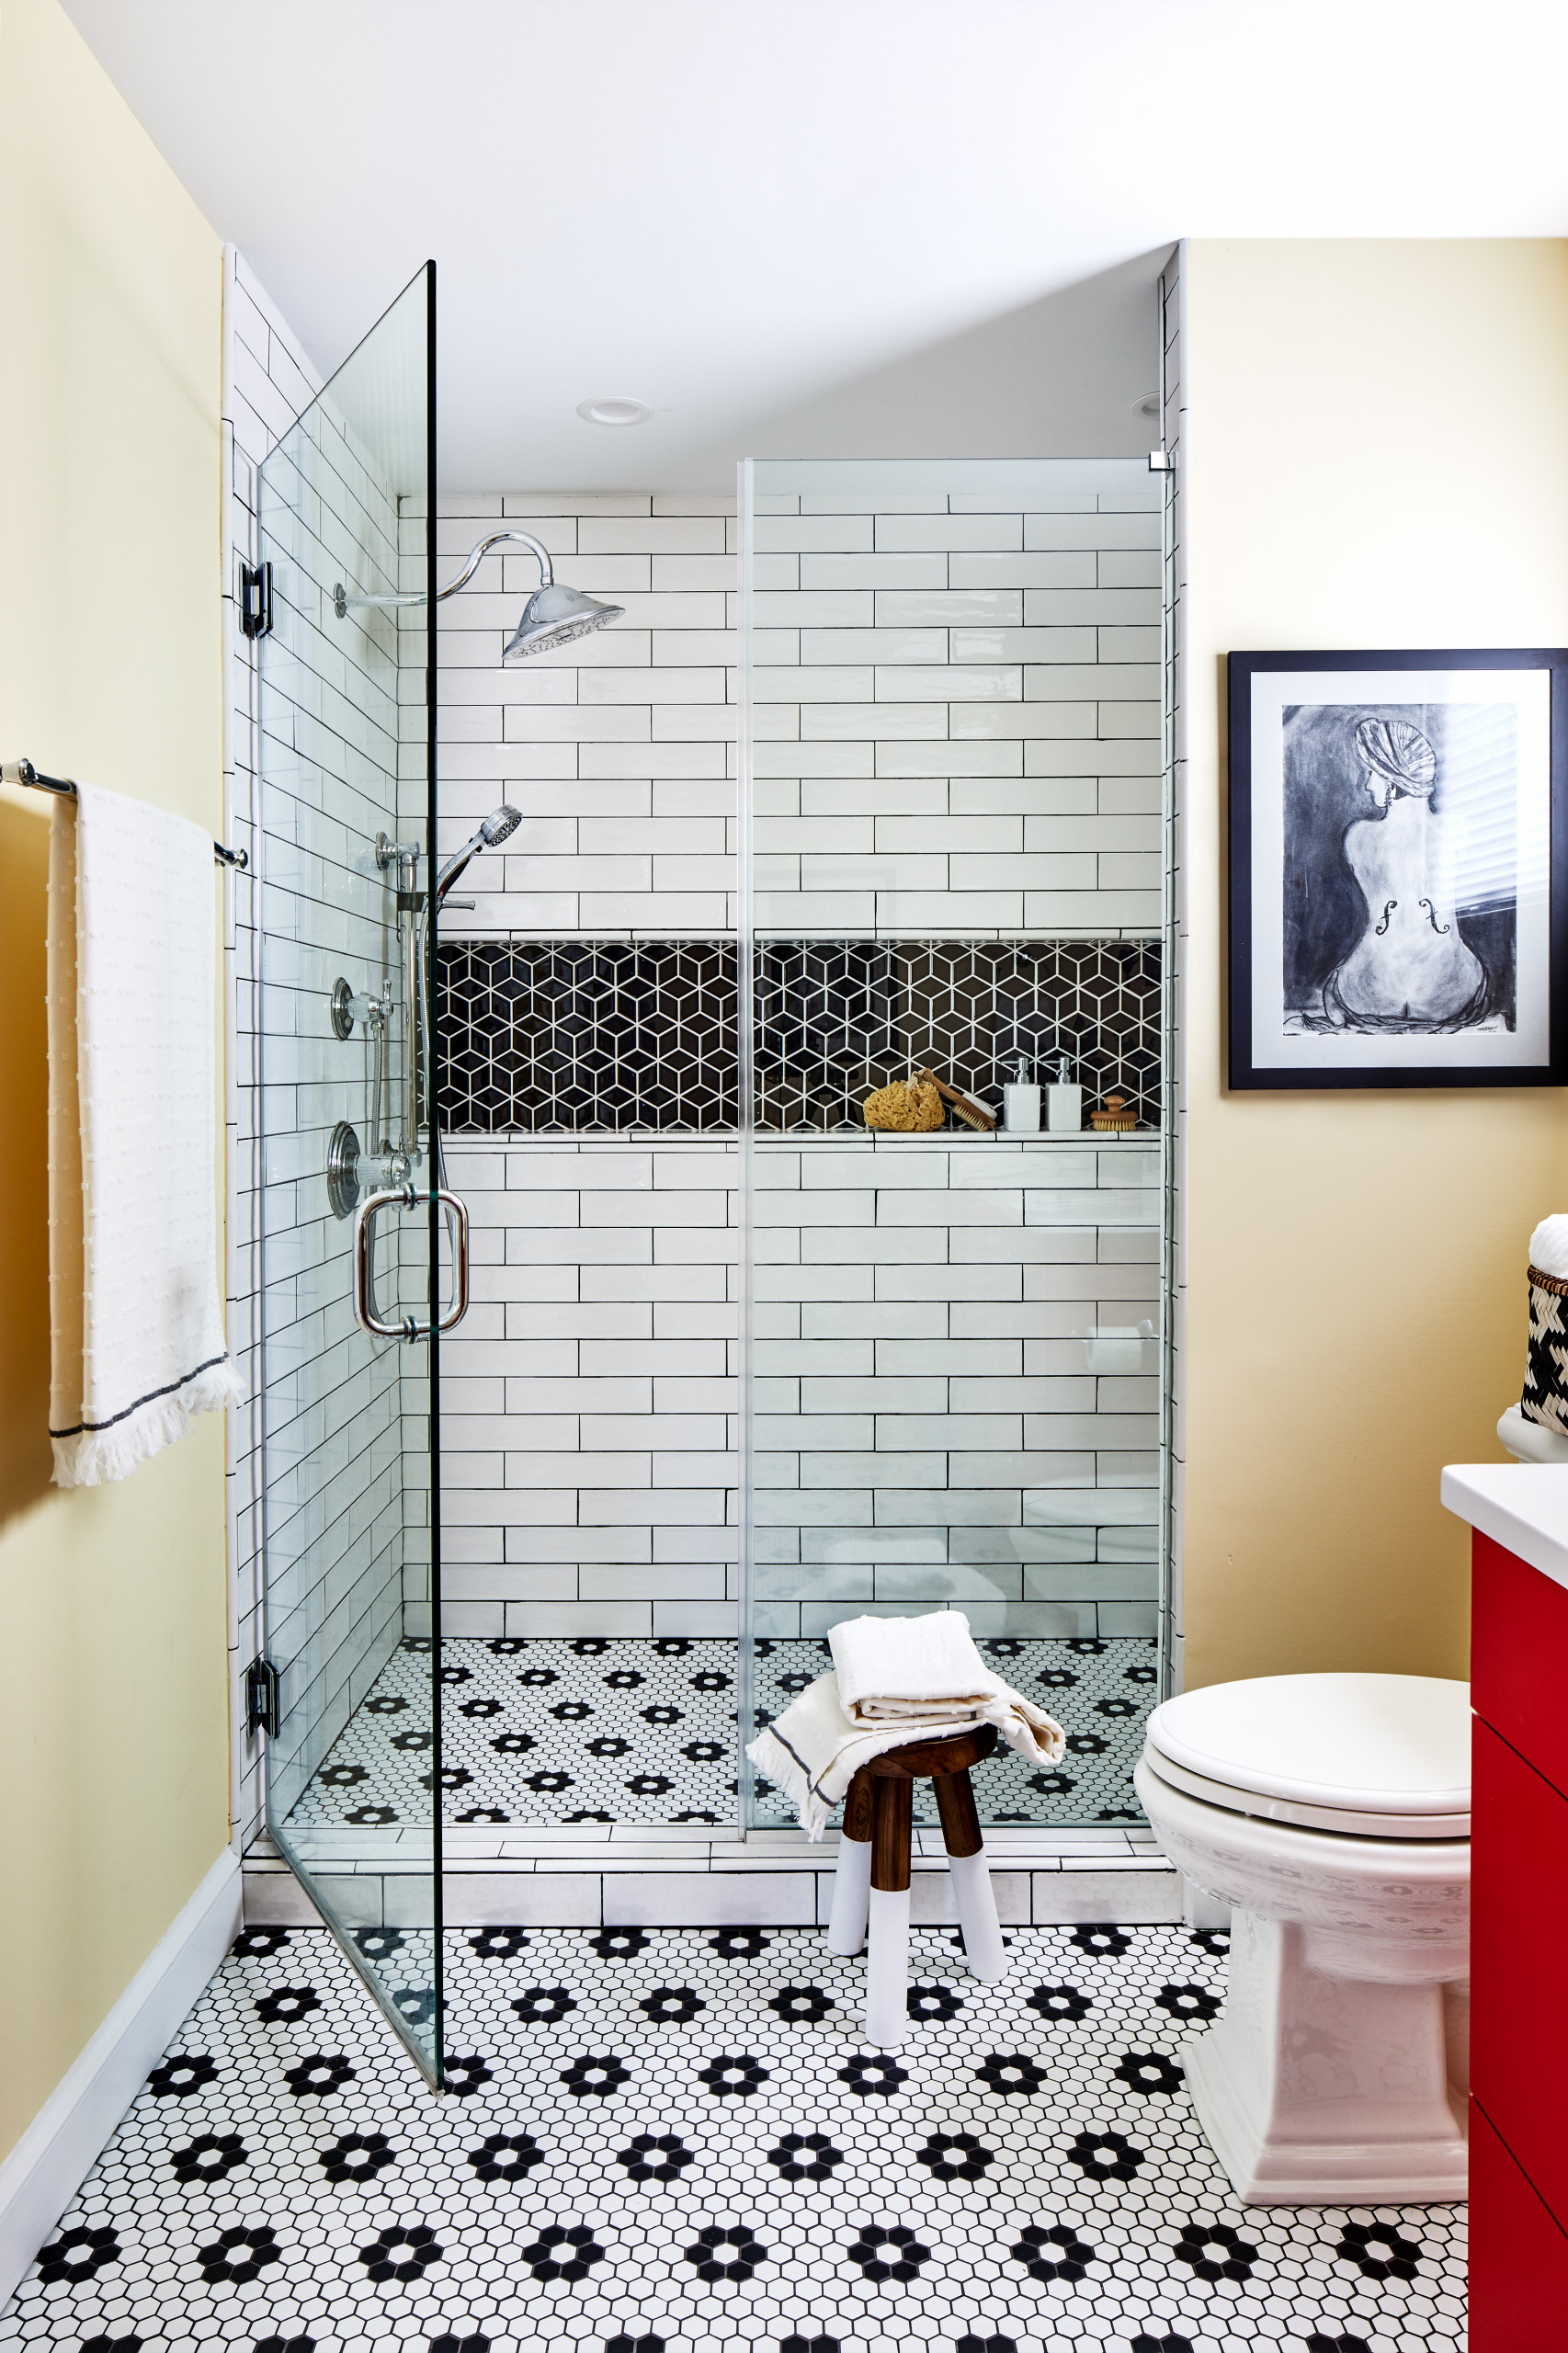 Gray Marble Tile Shower Niche with Shelf - Transitional - Bathroom